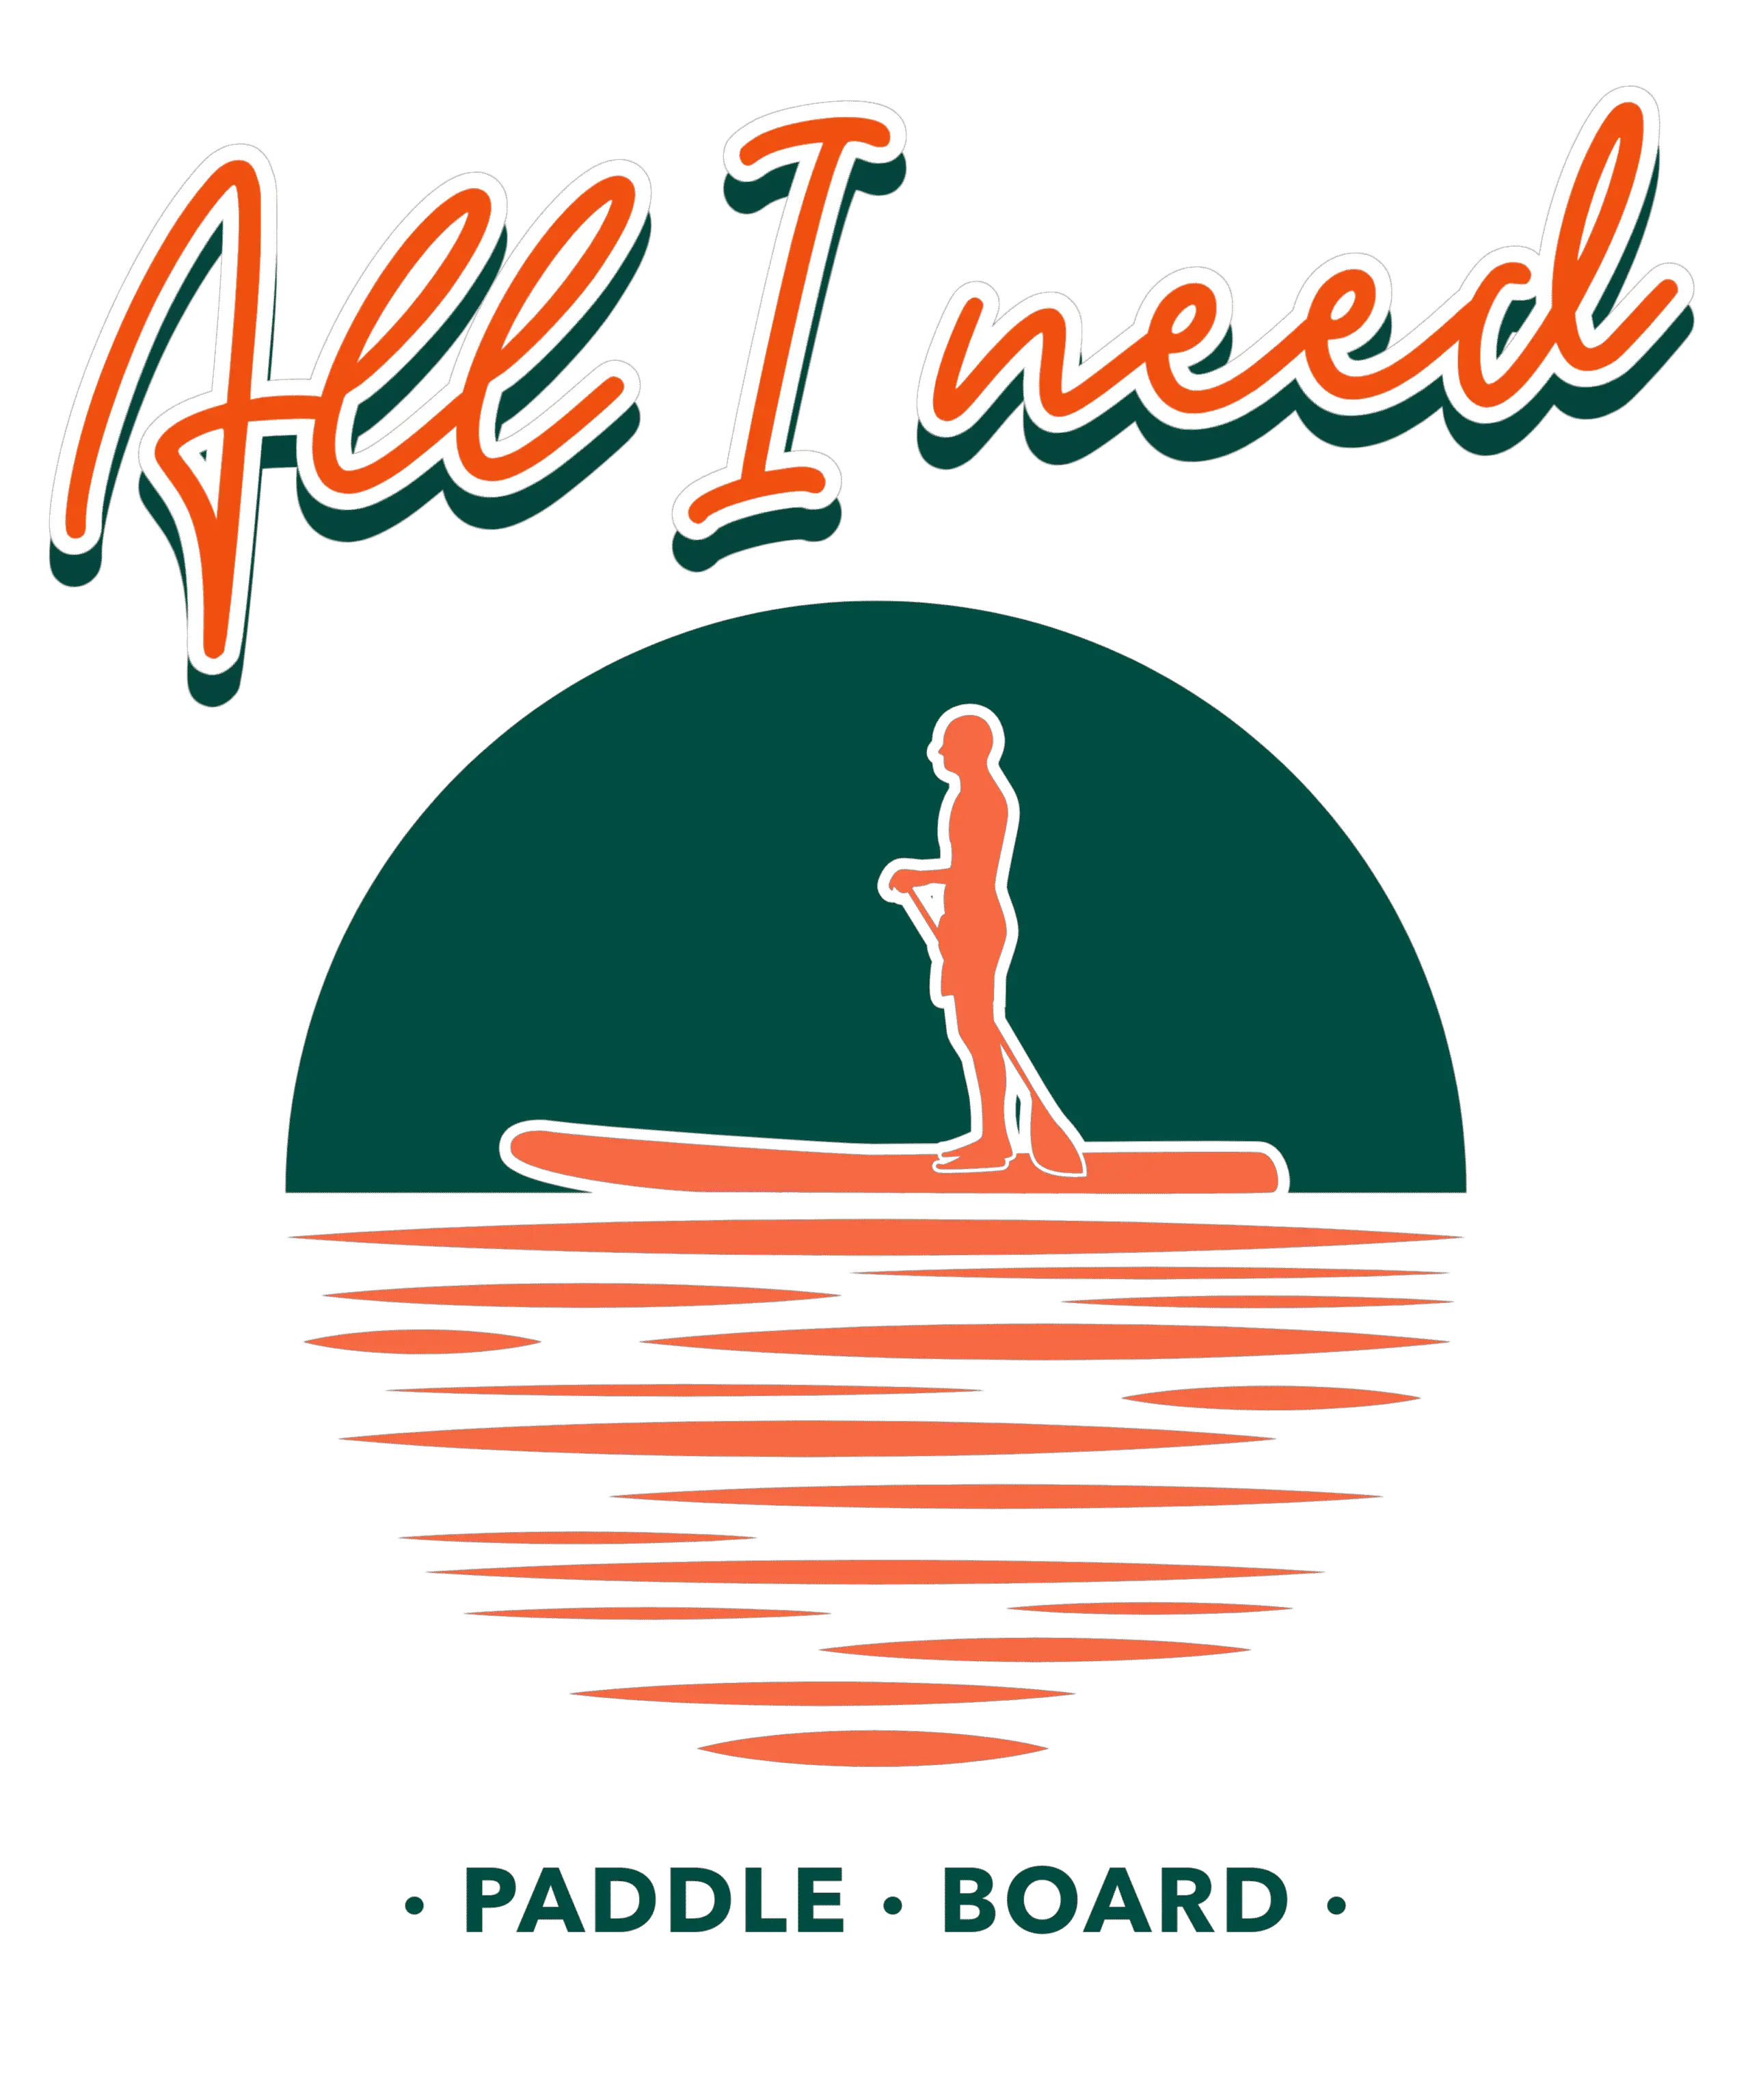 Downloadable Design about Paddleboarding which can be used to print out stickers or decals